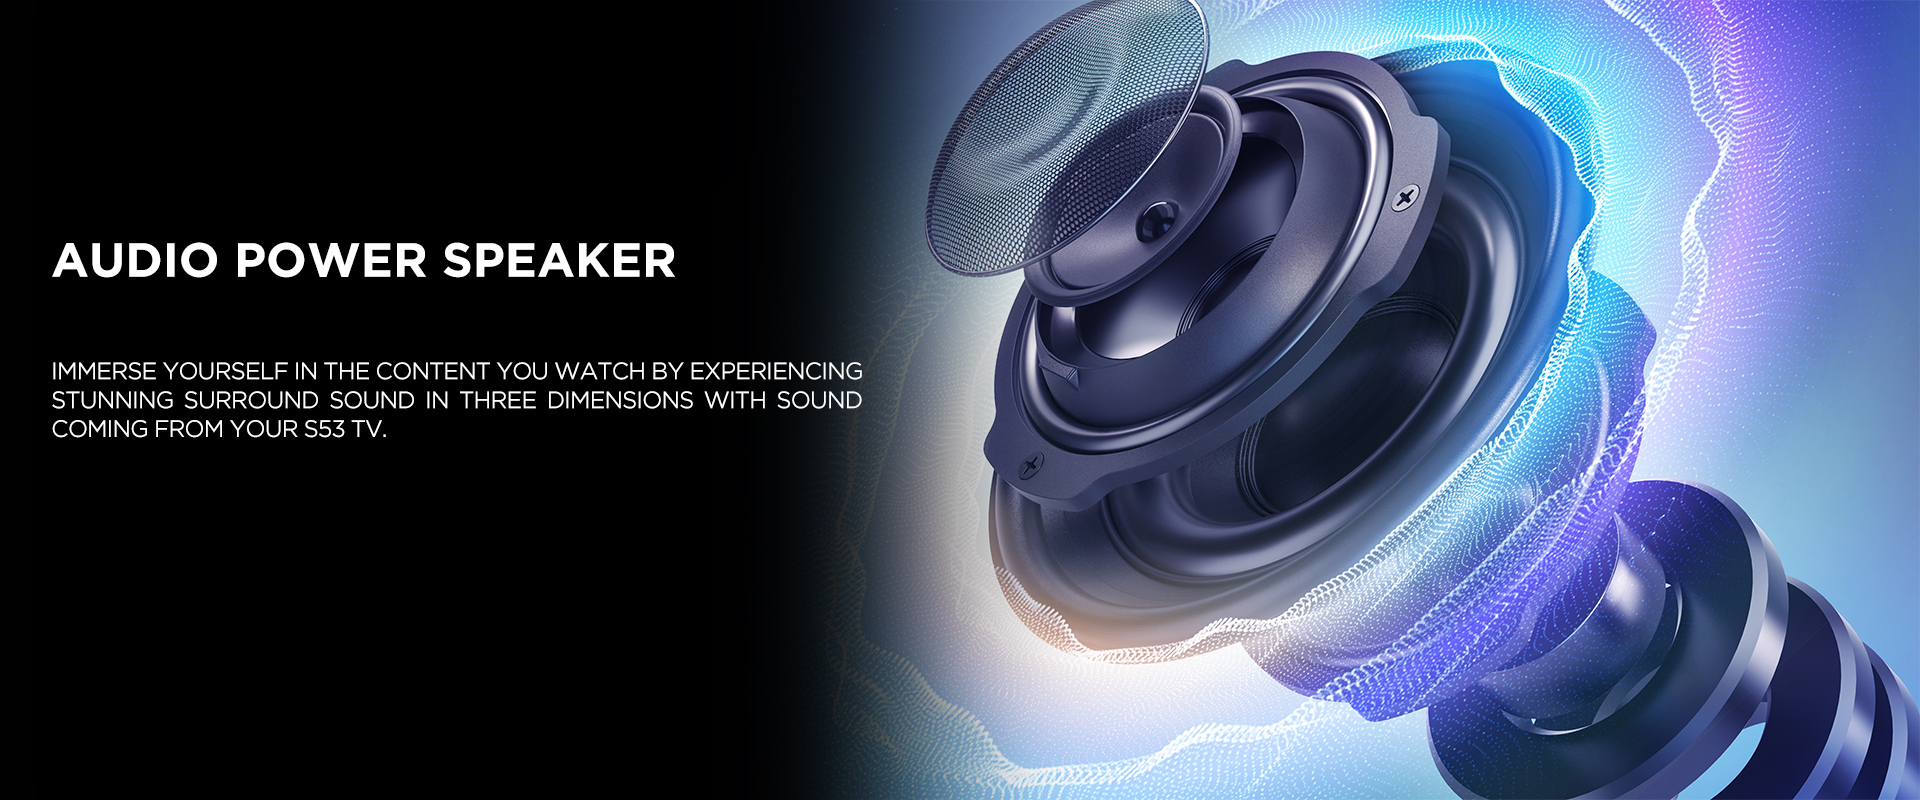 AUDIO POWER SPEAKER - Immerse yourself in the content you watch by experiencing stunning surround sound in three dimensions with sound coming from your S53 TV.